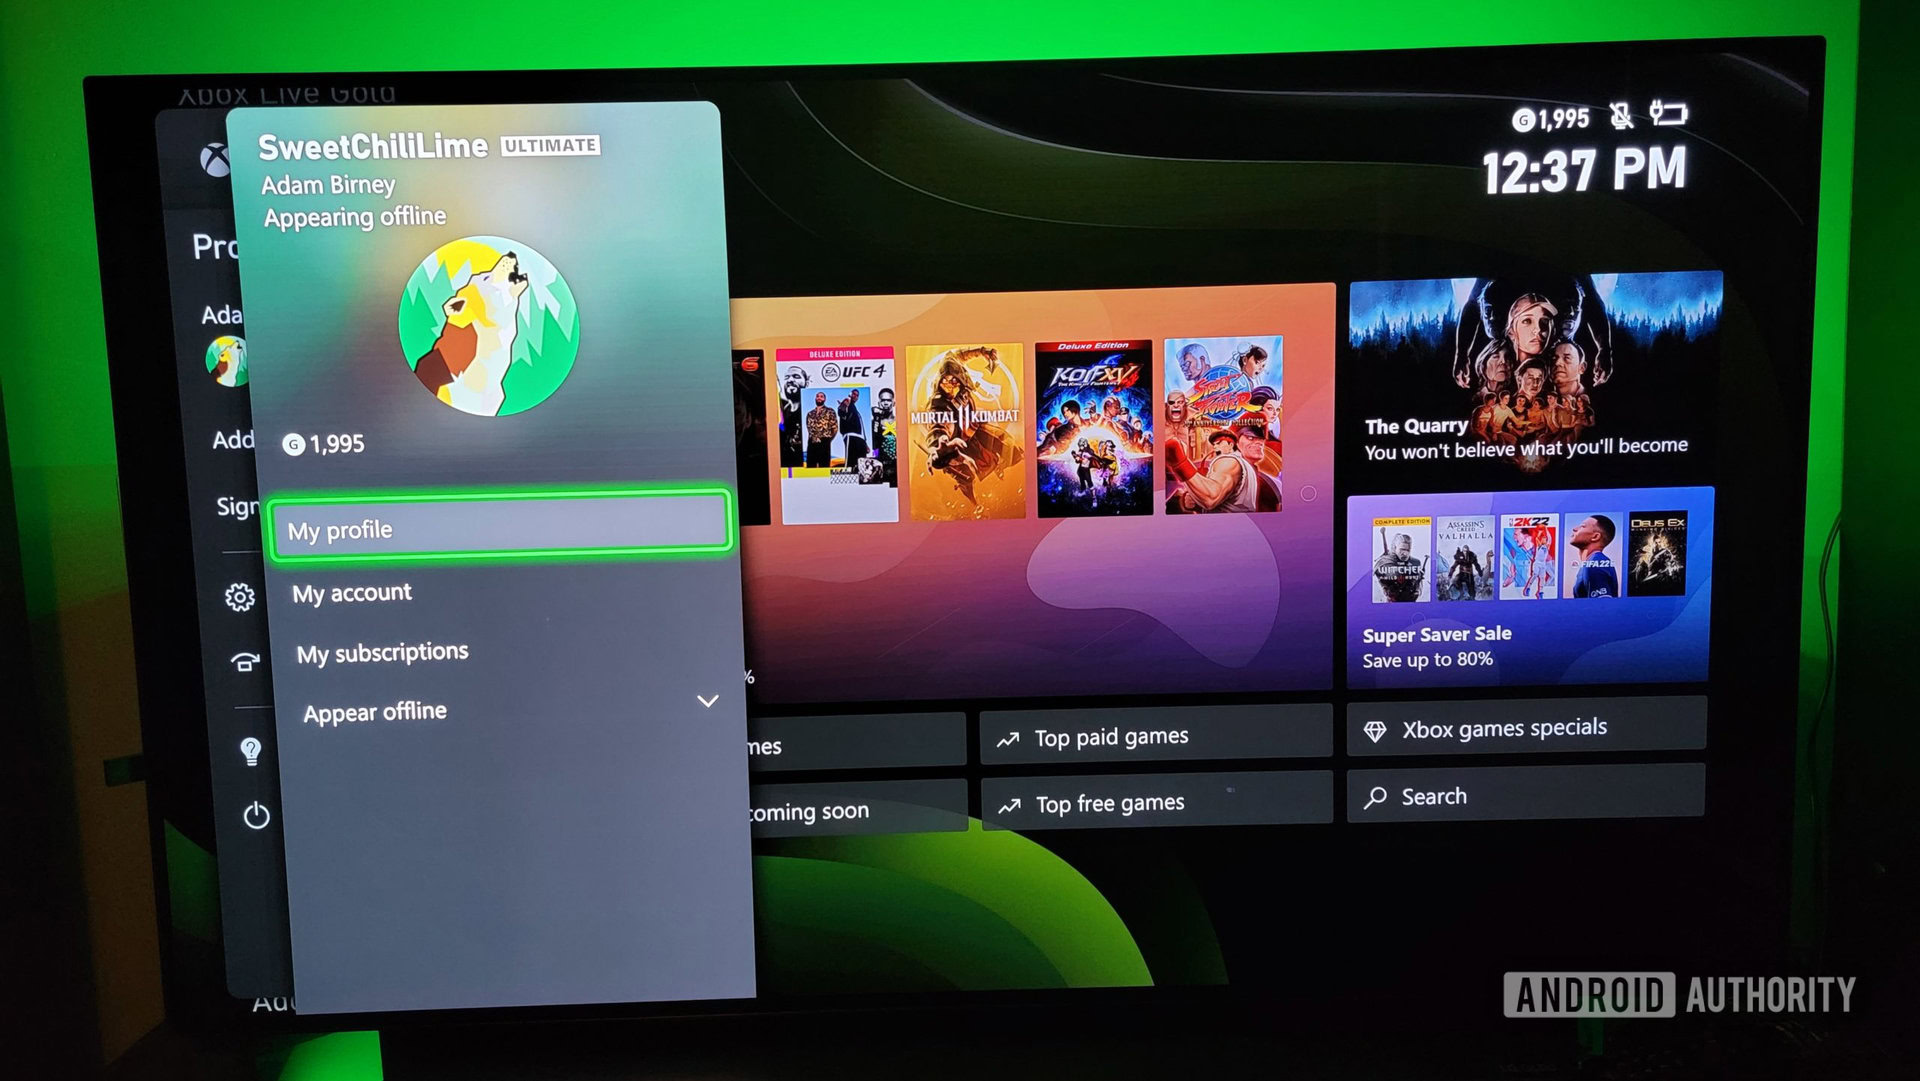 How To Change Gamertag On Xbox App - Full Guide 